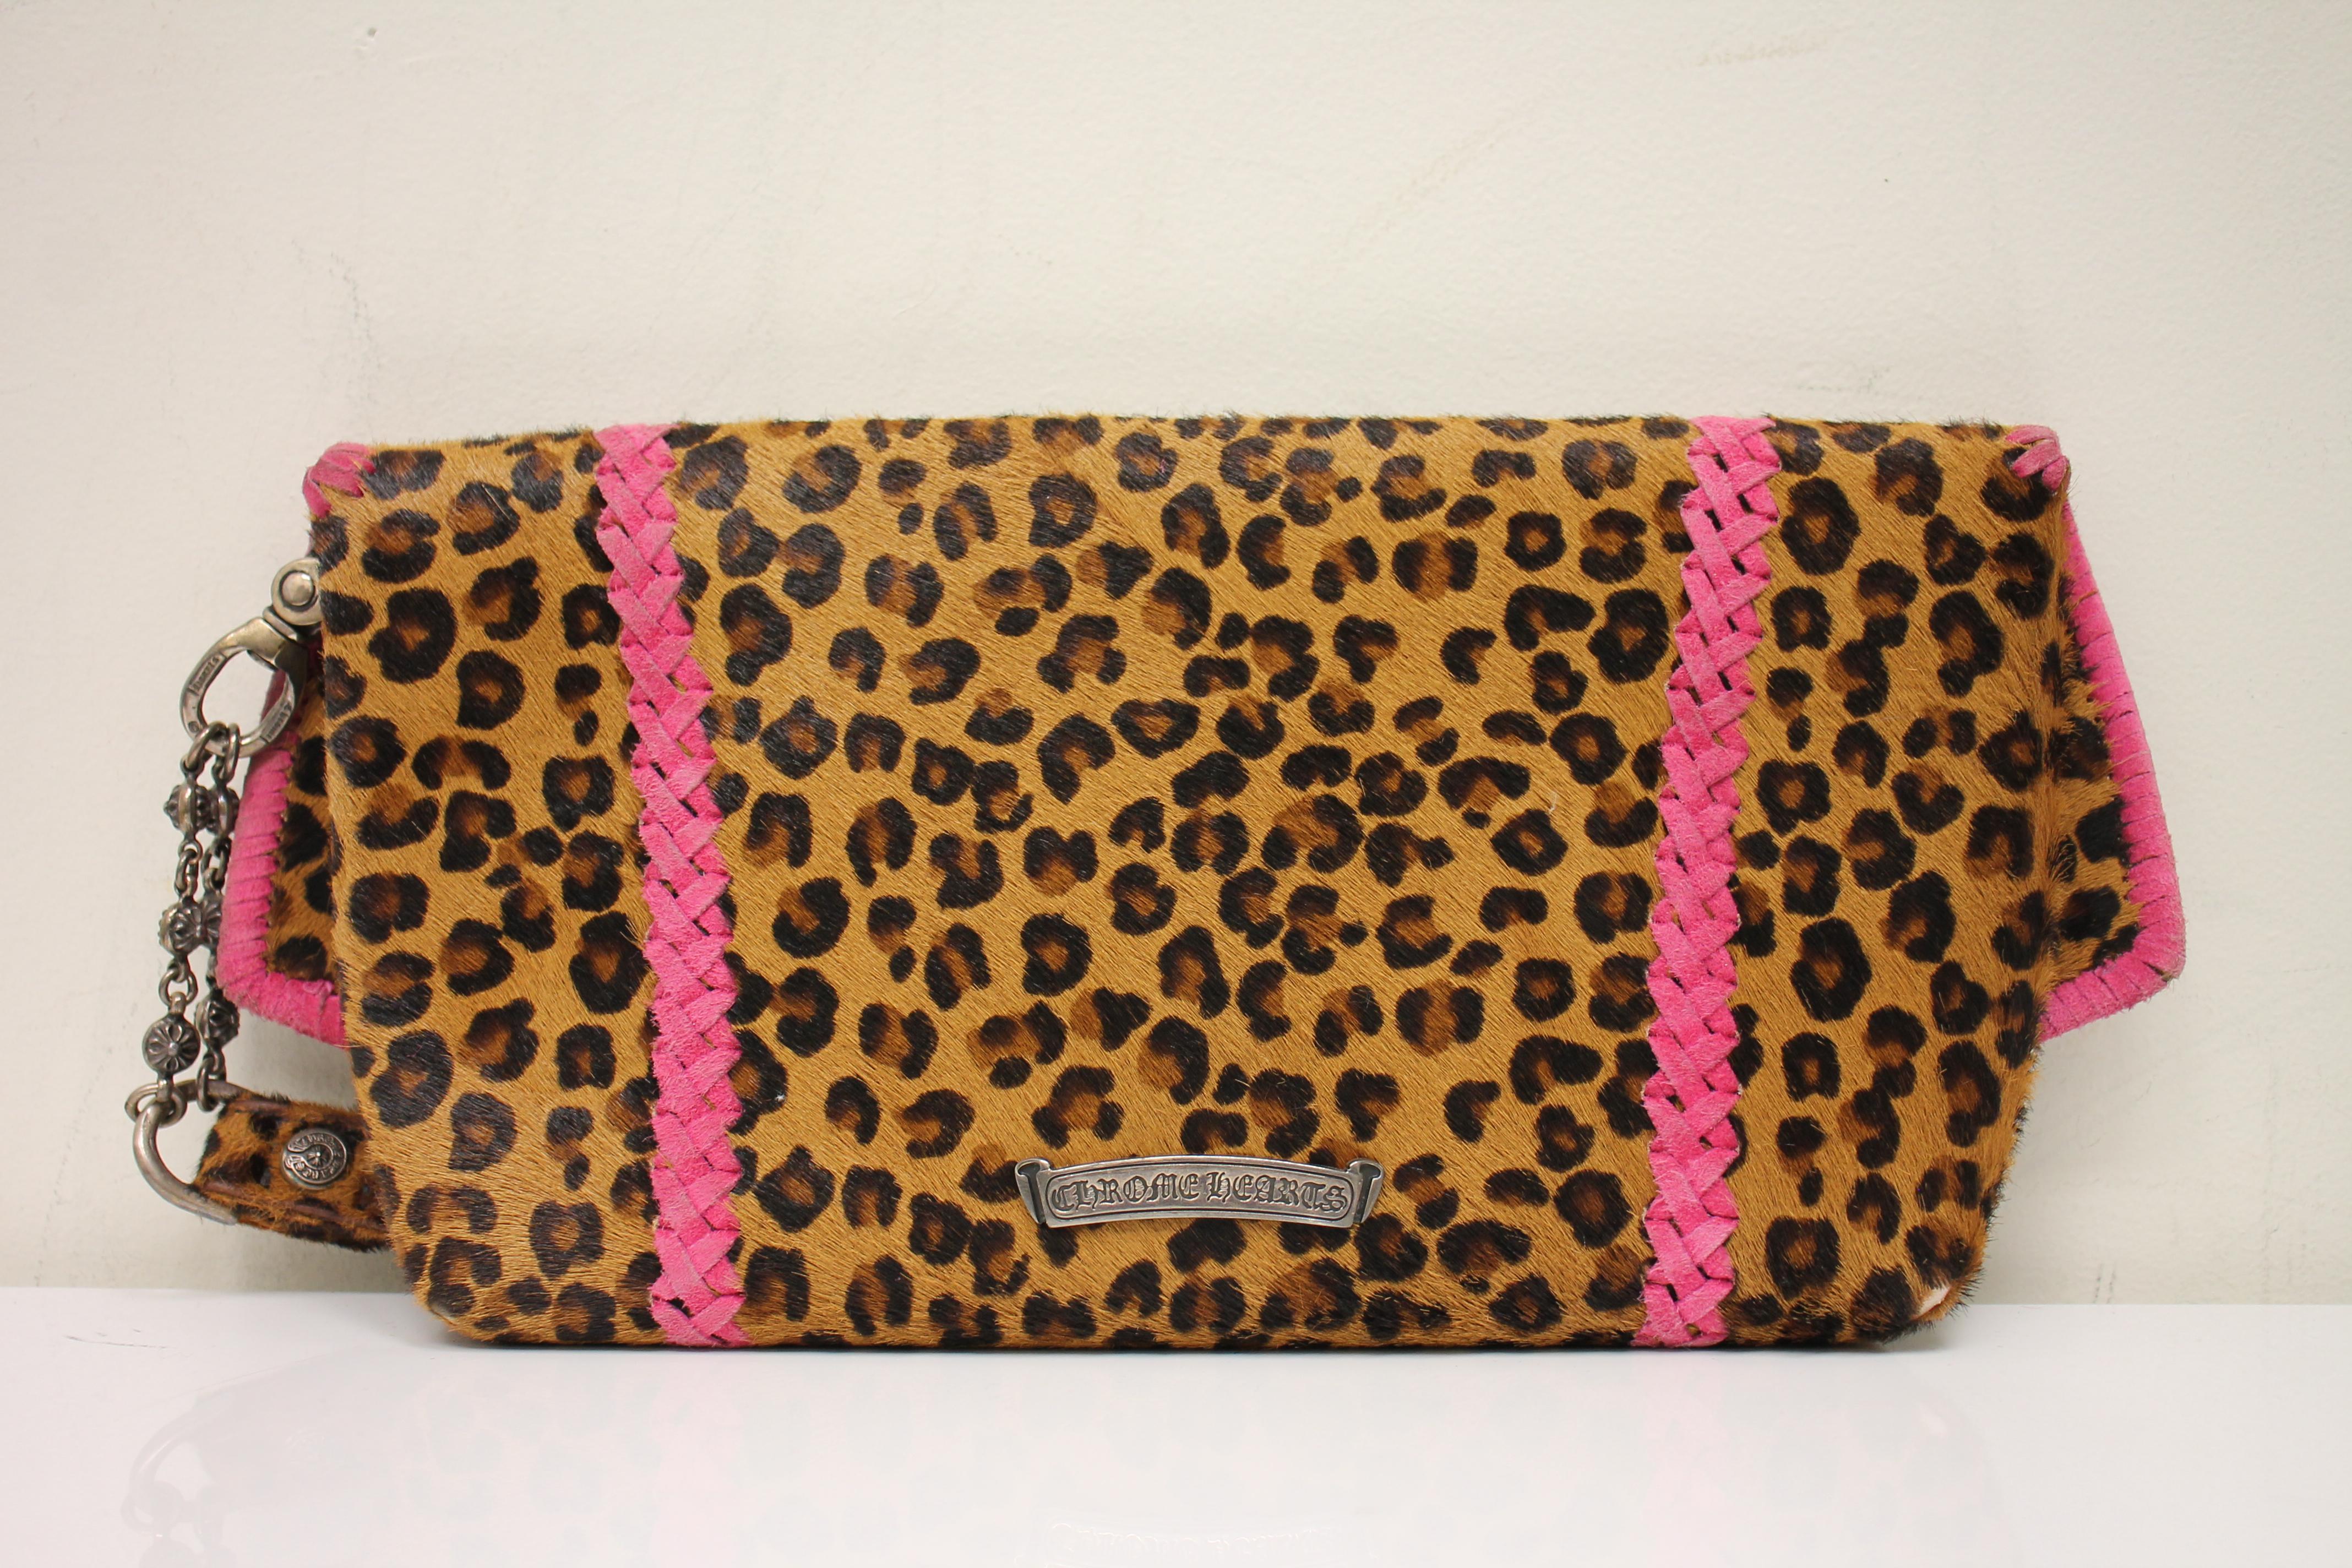 Cheetah calfskin. Silver-tone hardware. Pink suede trim and detail throughout. Front flap with magnetic snap closure feturing hardware logo at front. Detachable wrist strap at side. Lined interior. One interior opened pocket.